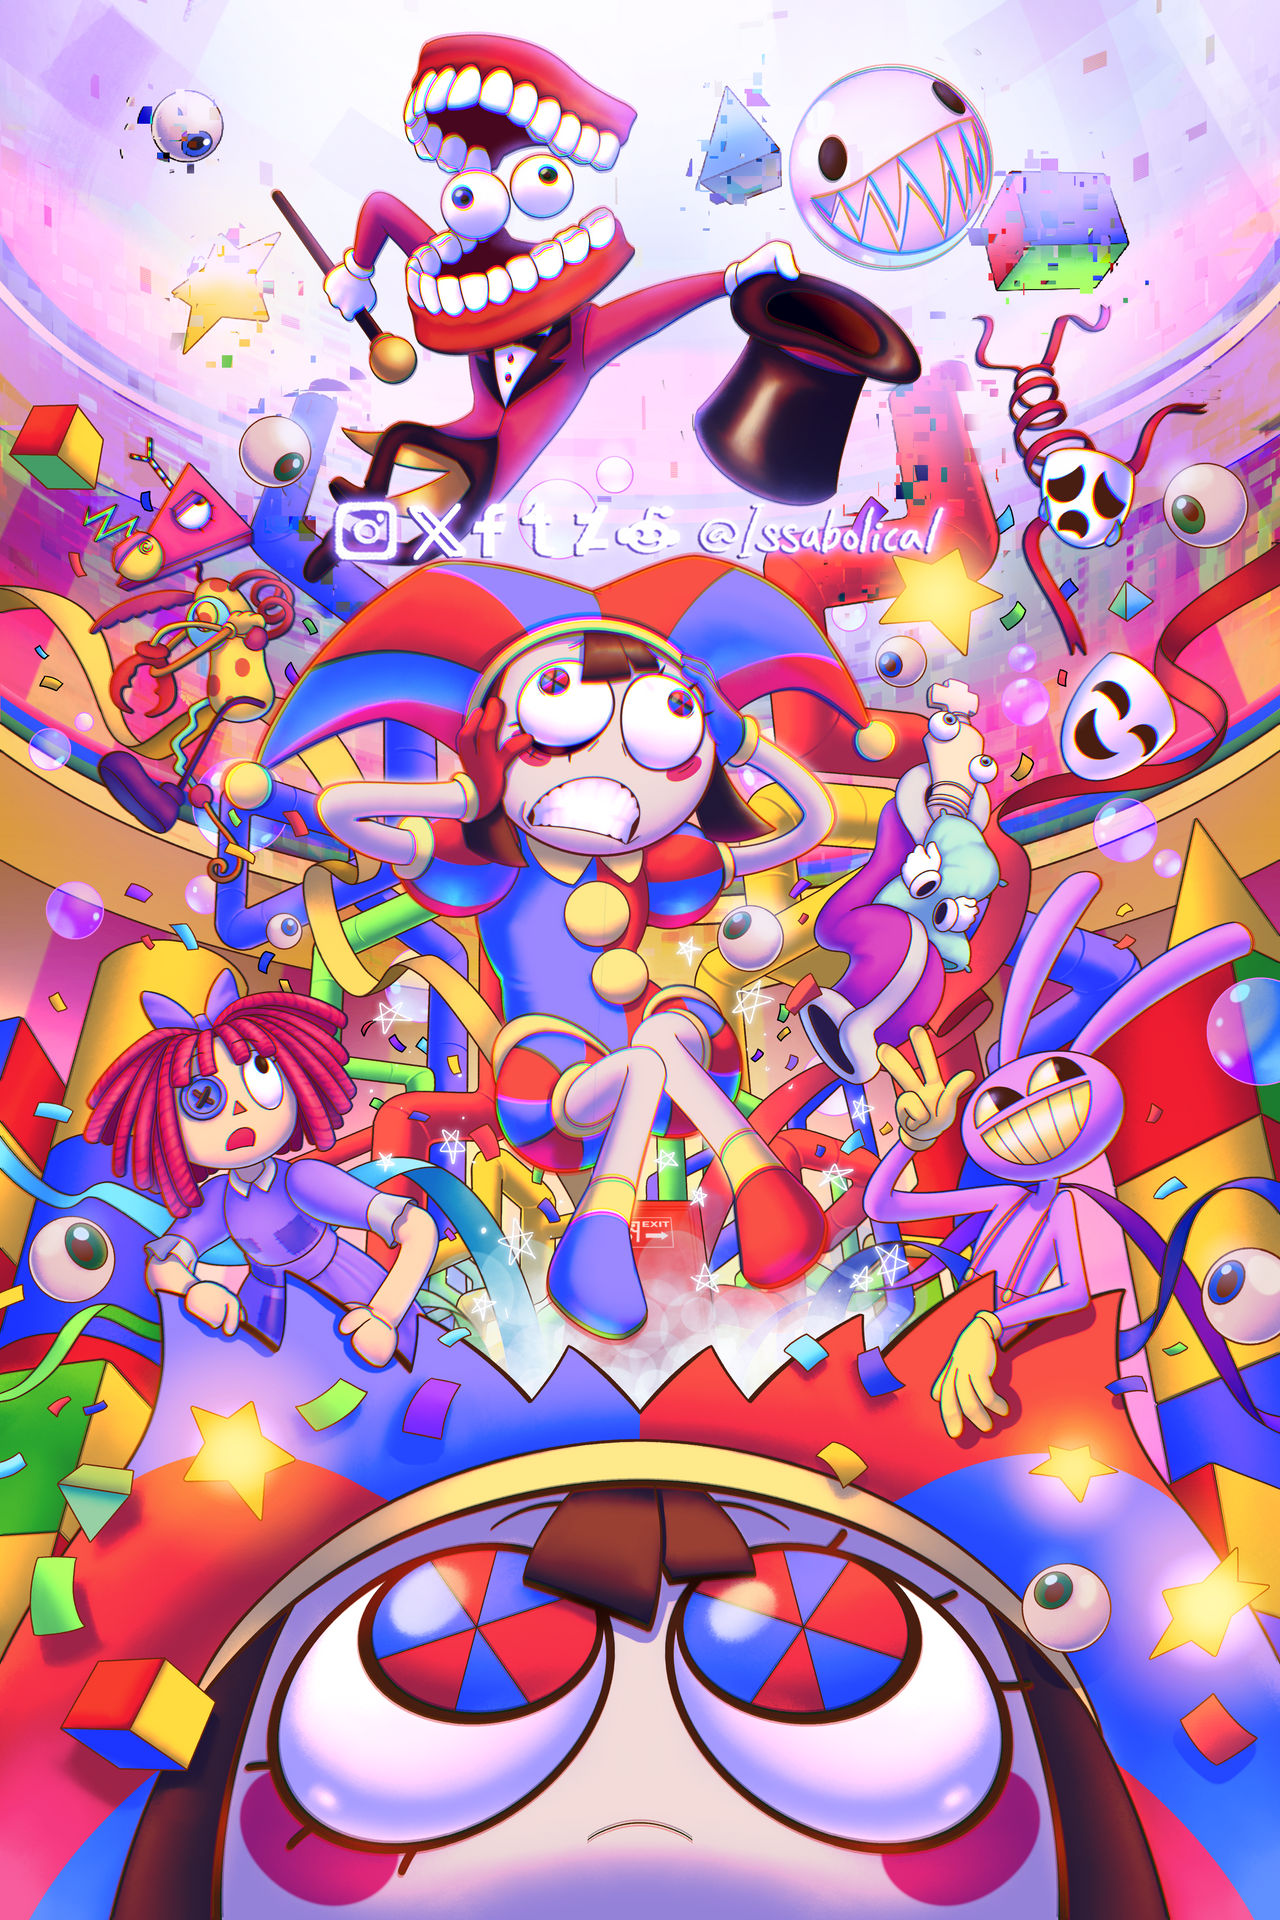 The Amazing Digital Circus by Issabolical on DeviantArt